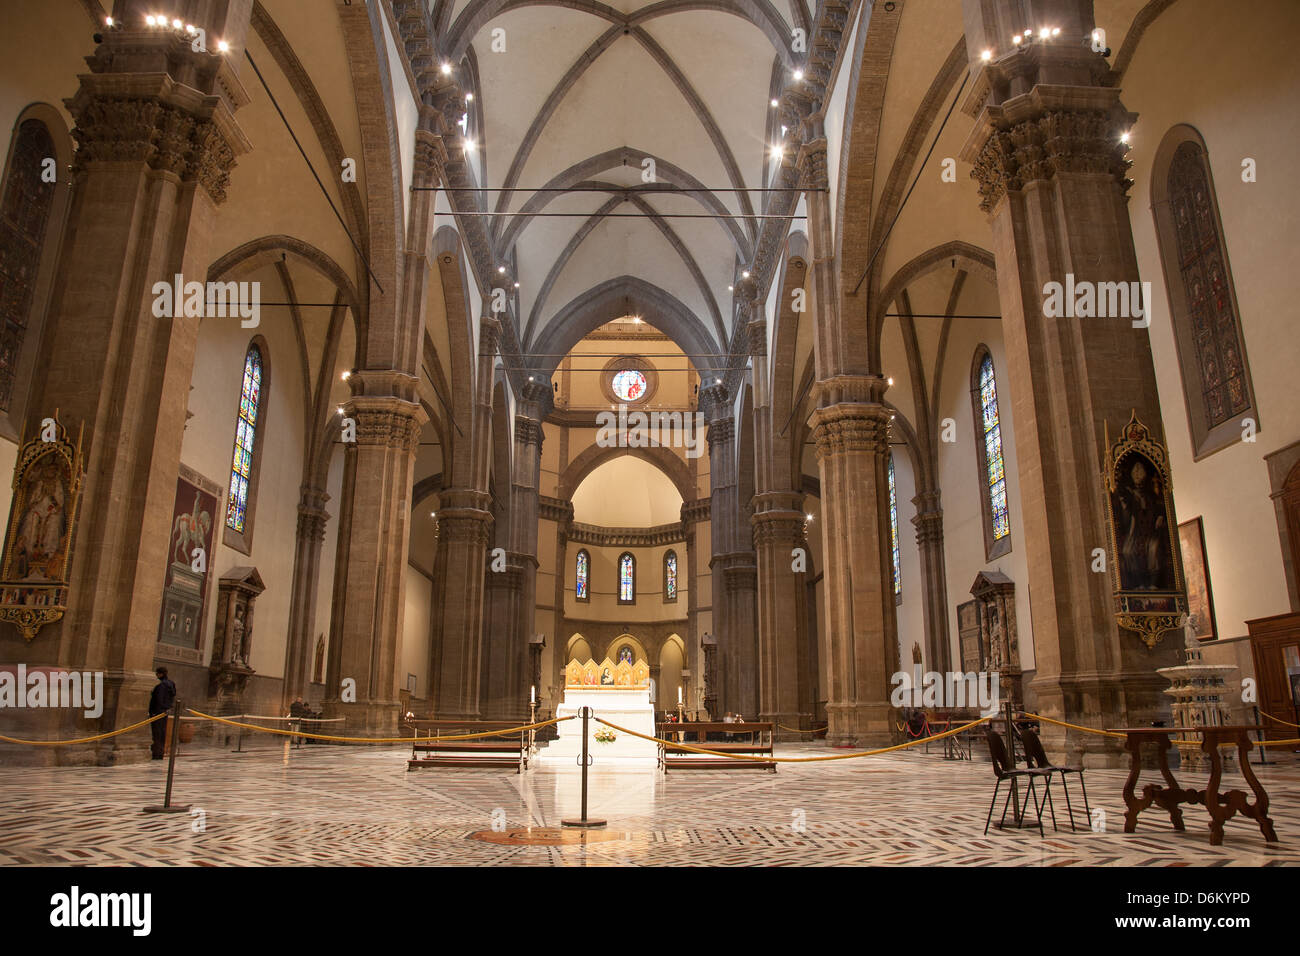 Interior of Duomo Cathedral Church, Florence, Italy Stock Photo